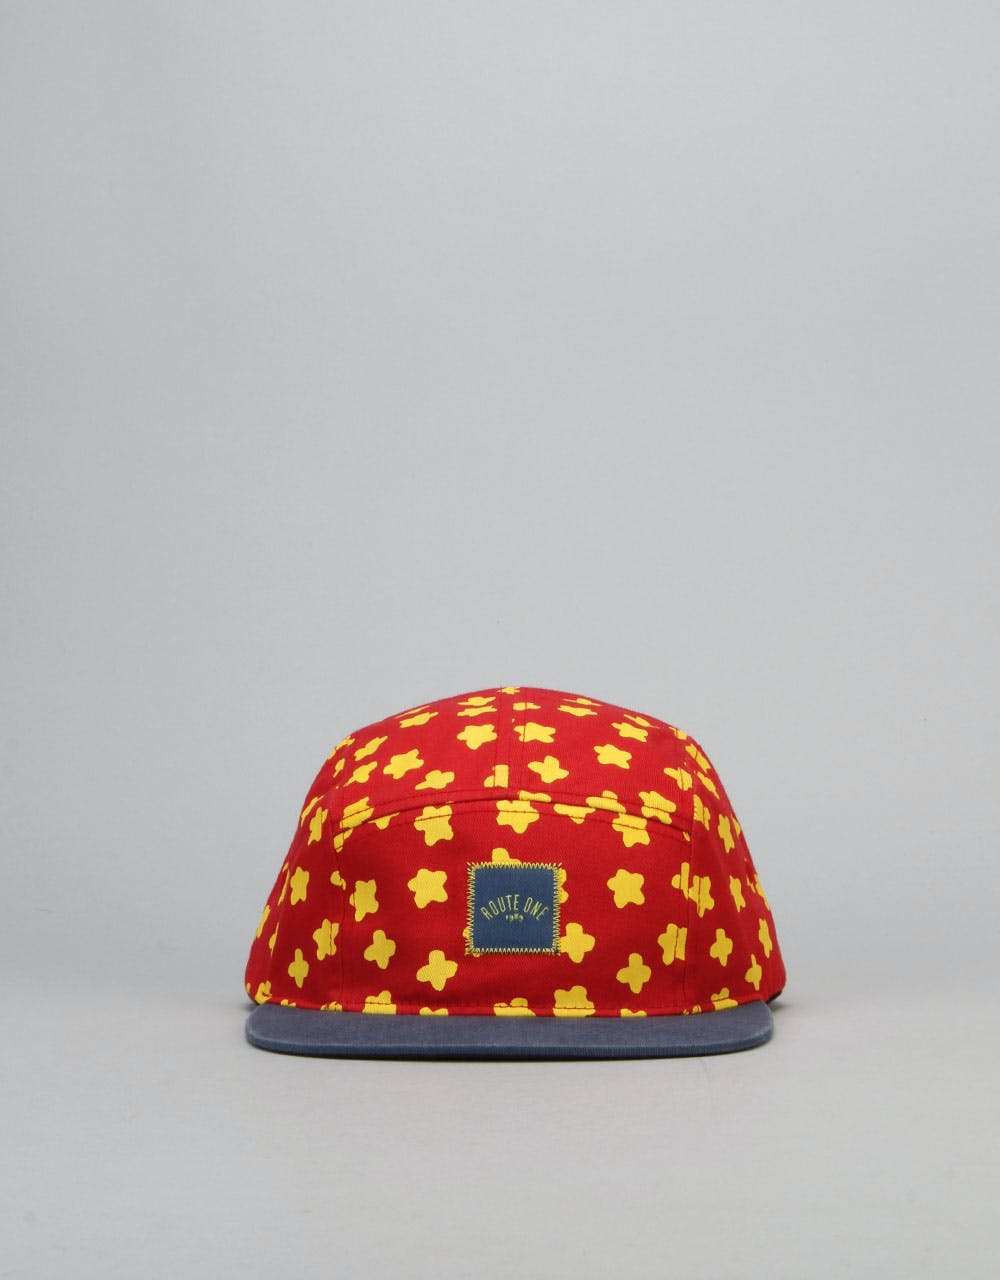 Route One Giggity 5 Panel Cap - Red/Yellow/Blue